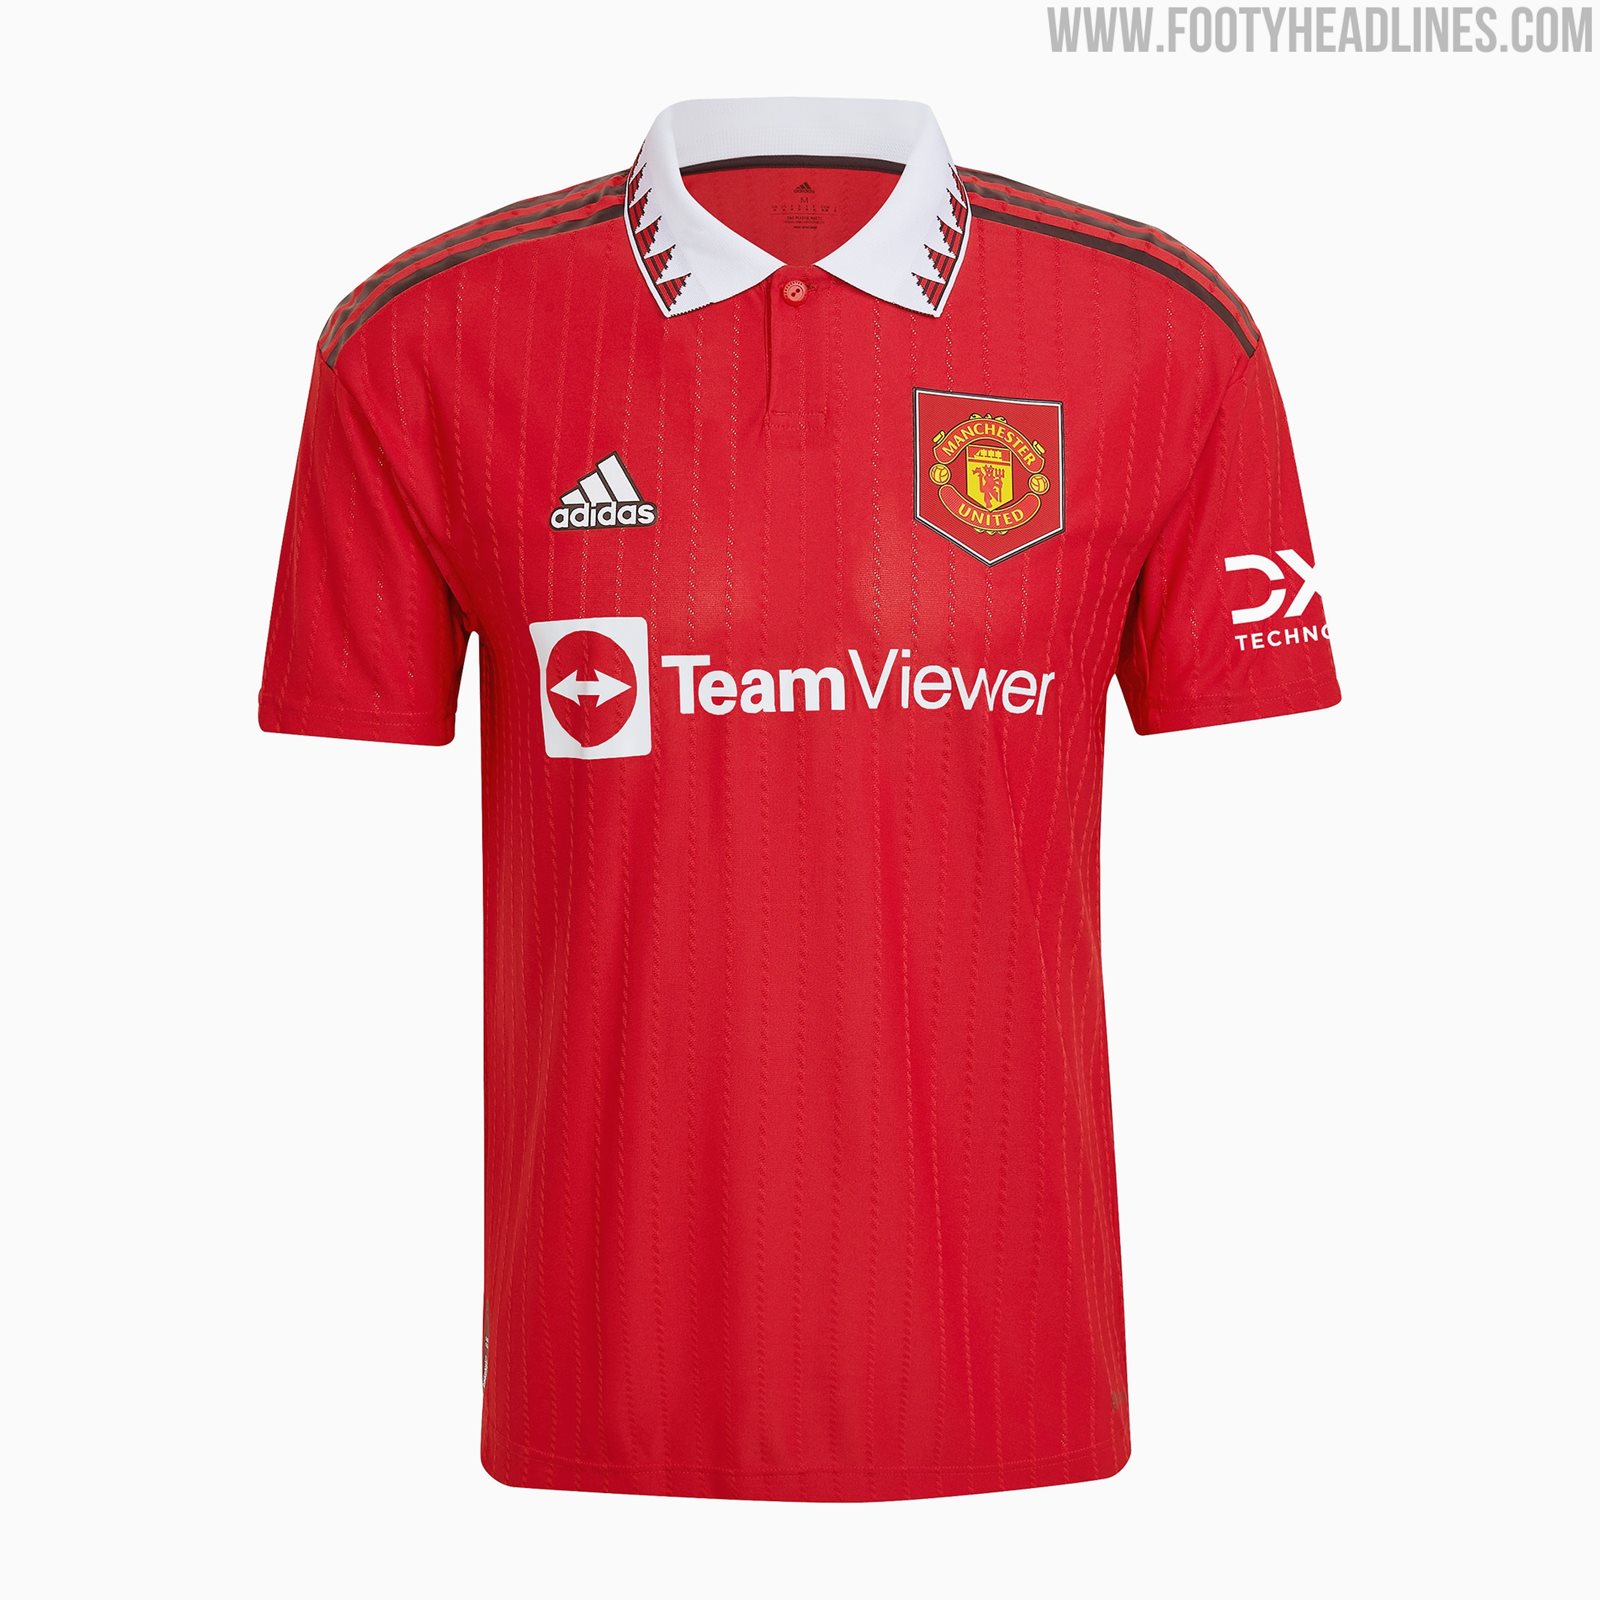 Manchester United 2023 Icon Remake Kit Leaked - Footy Headlines